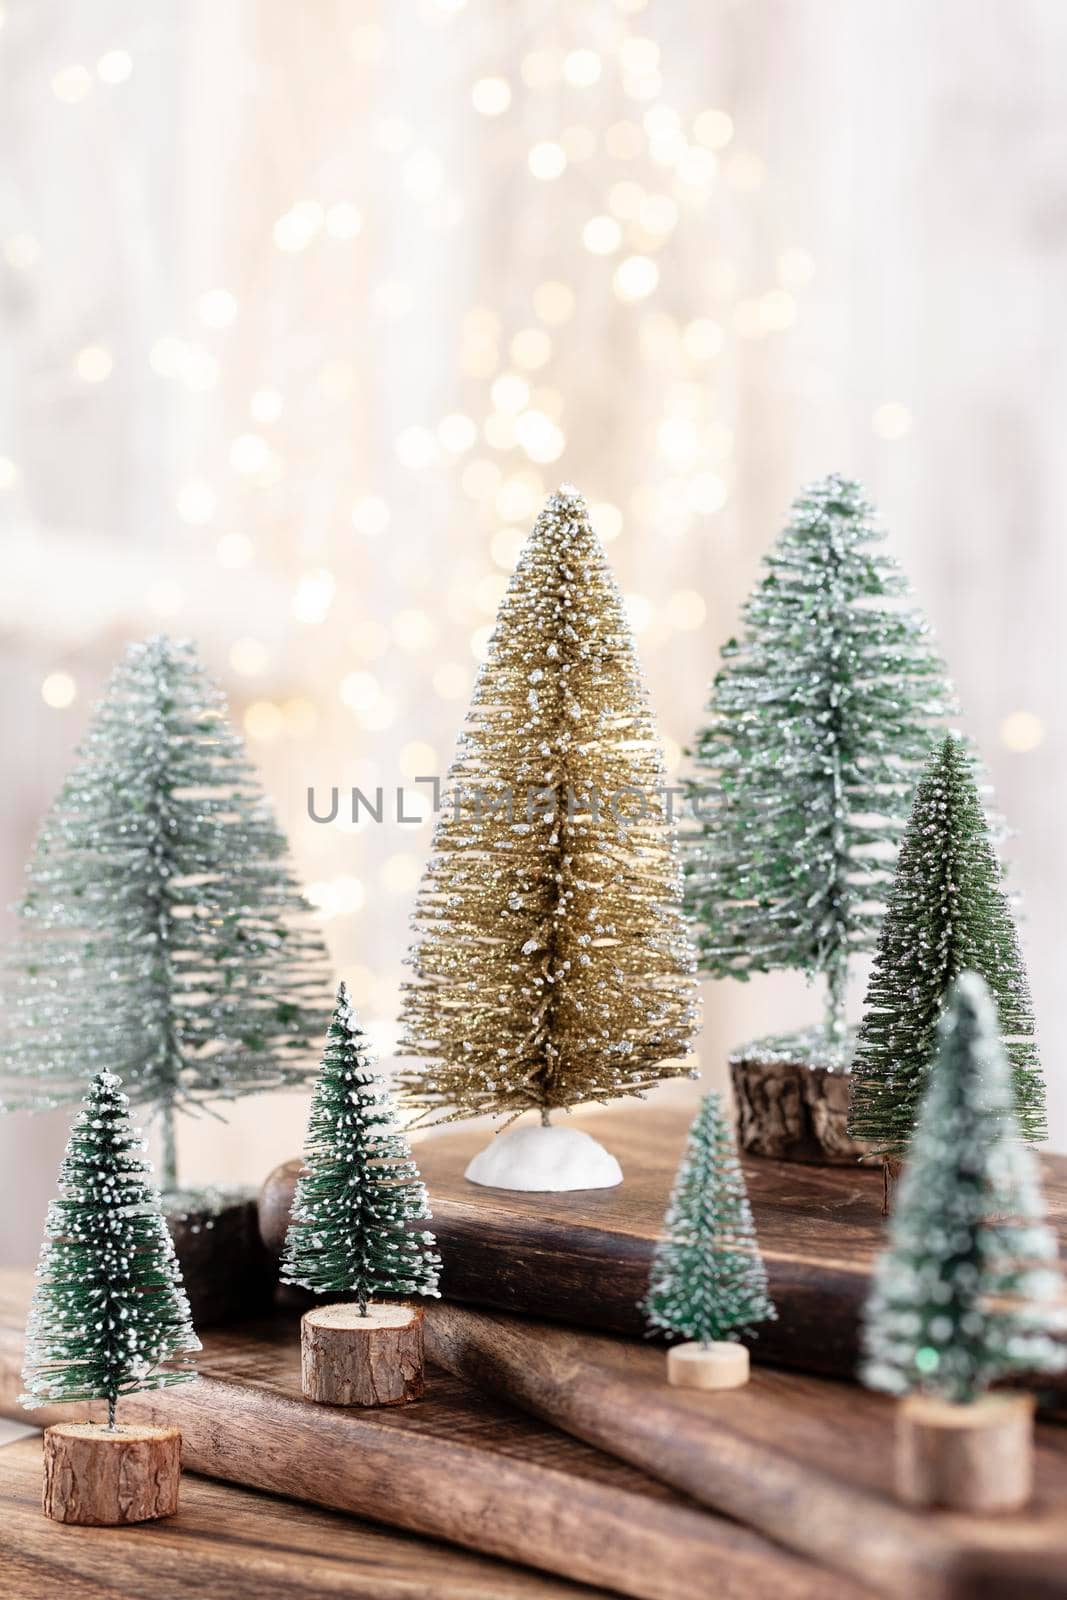 Christmas tree on wooden, bokeh background. Christmas holiday celebration concept. Greeting card.